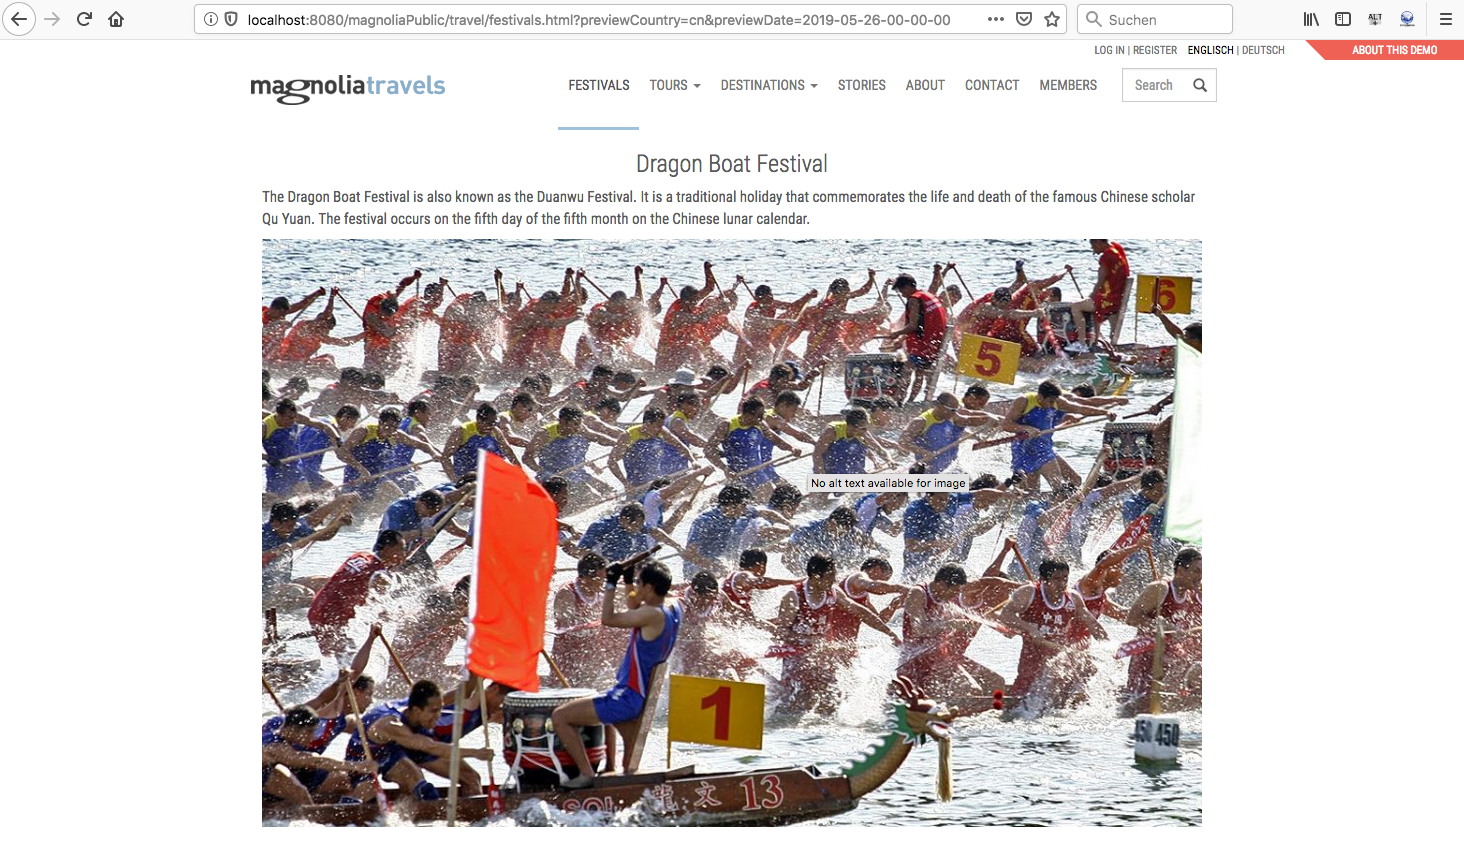 The image of the Dragon Boat Festival a visitor from China on May 26, 2019 sees